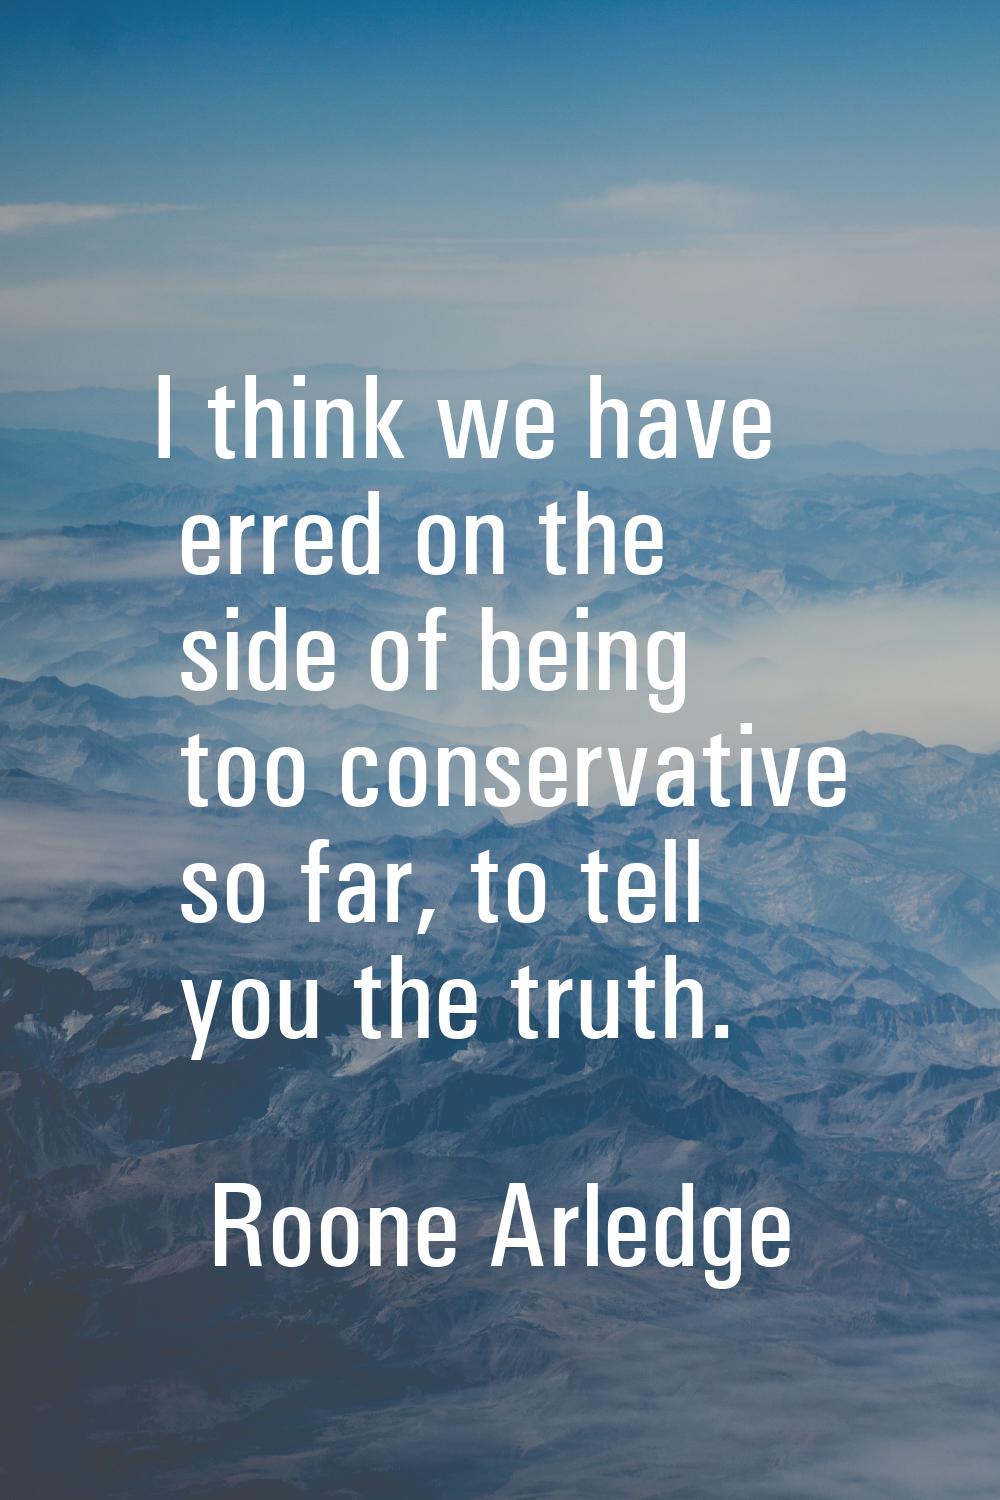 I think we have erred on the side of being too conservative so far, to tell you the truth.